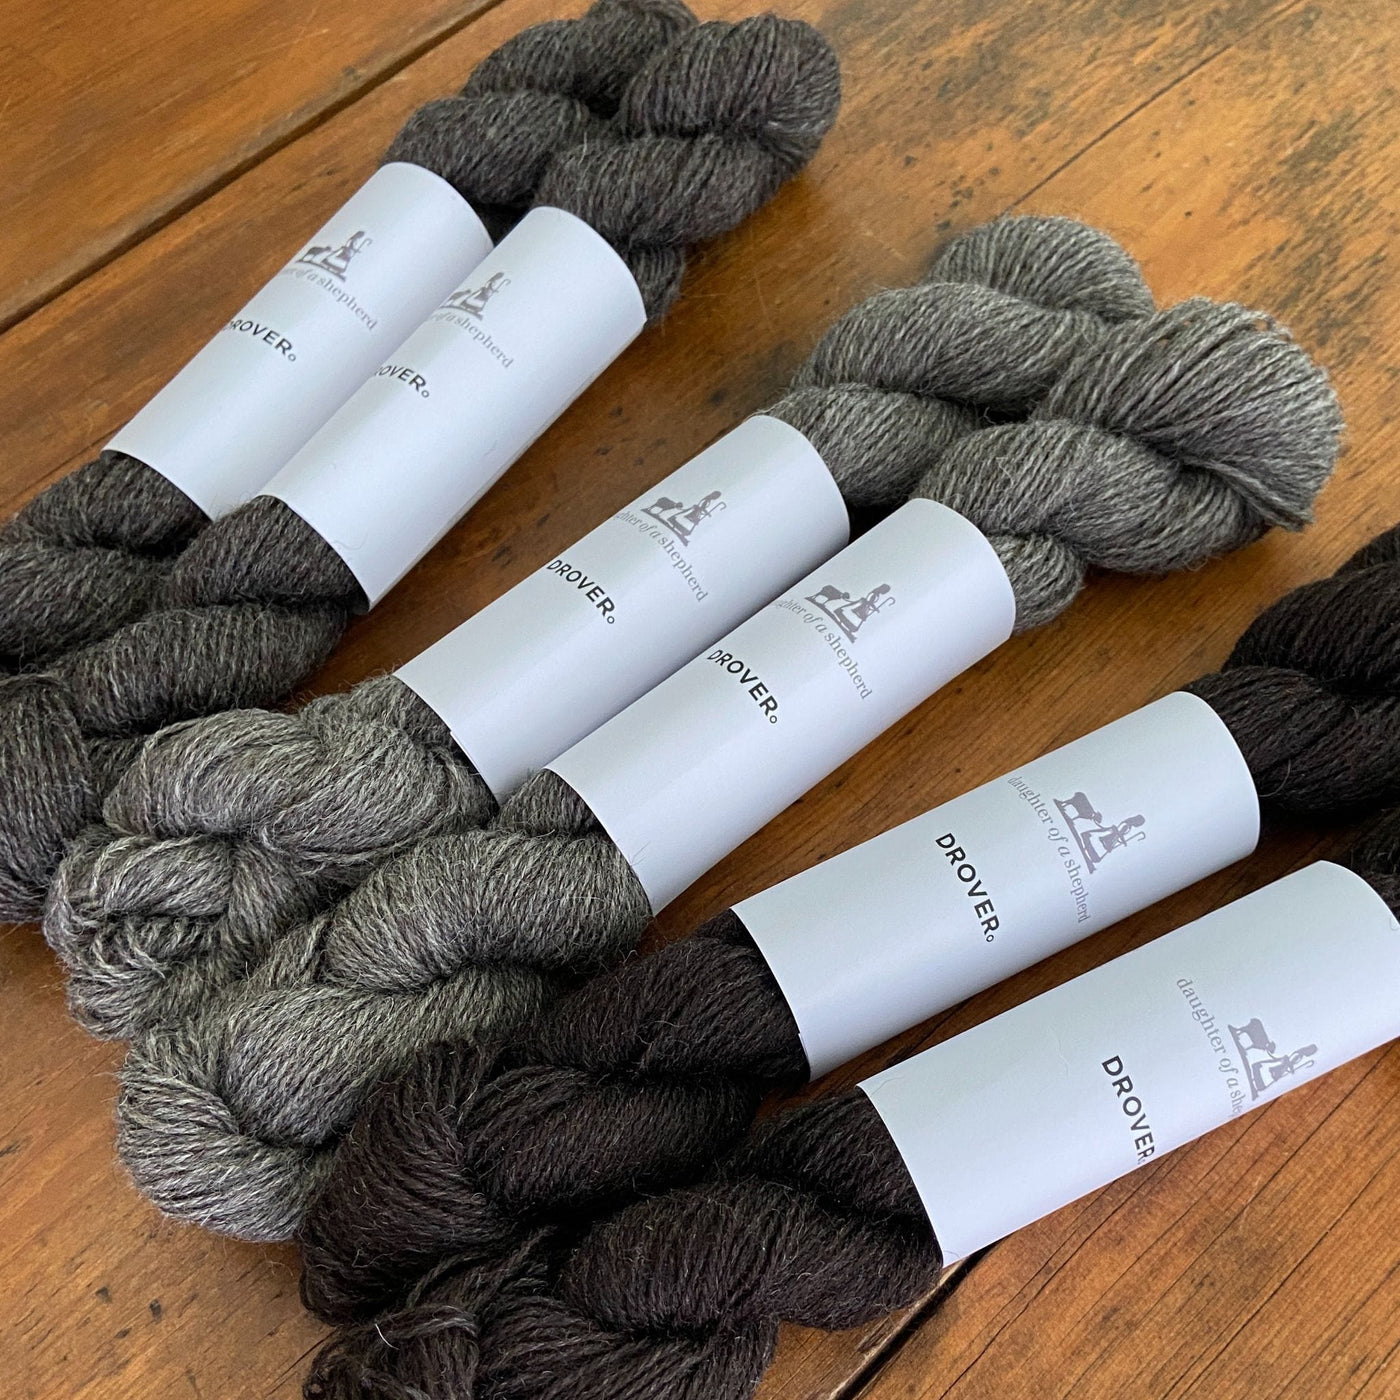 Skeins of Daughter of a Shepherd Drover yarn in shades of grey on table.